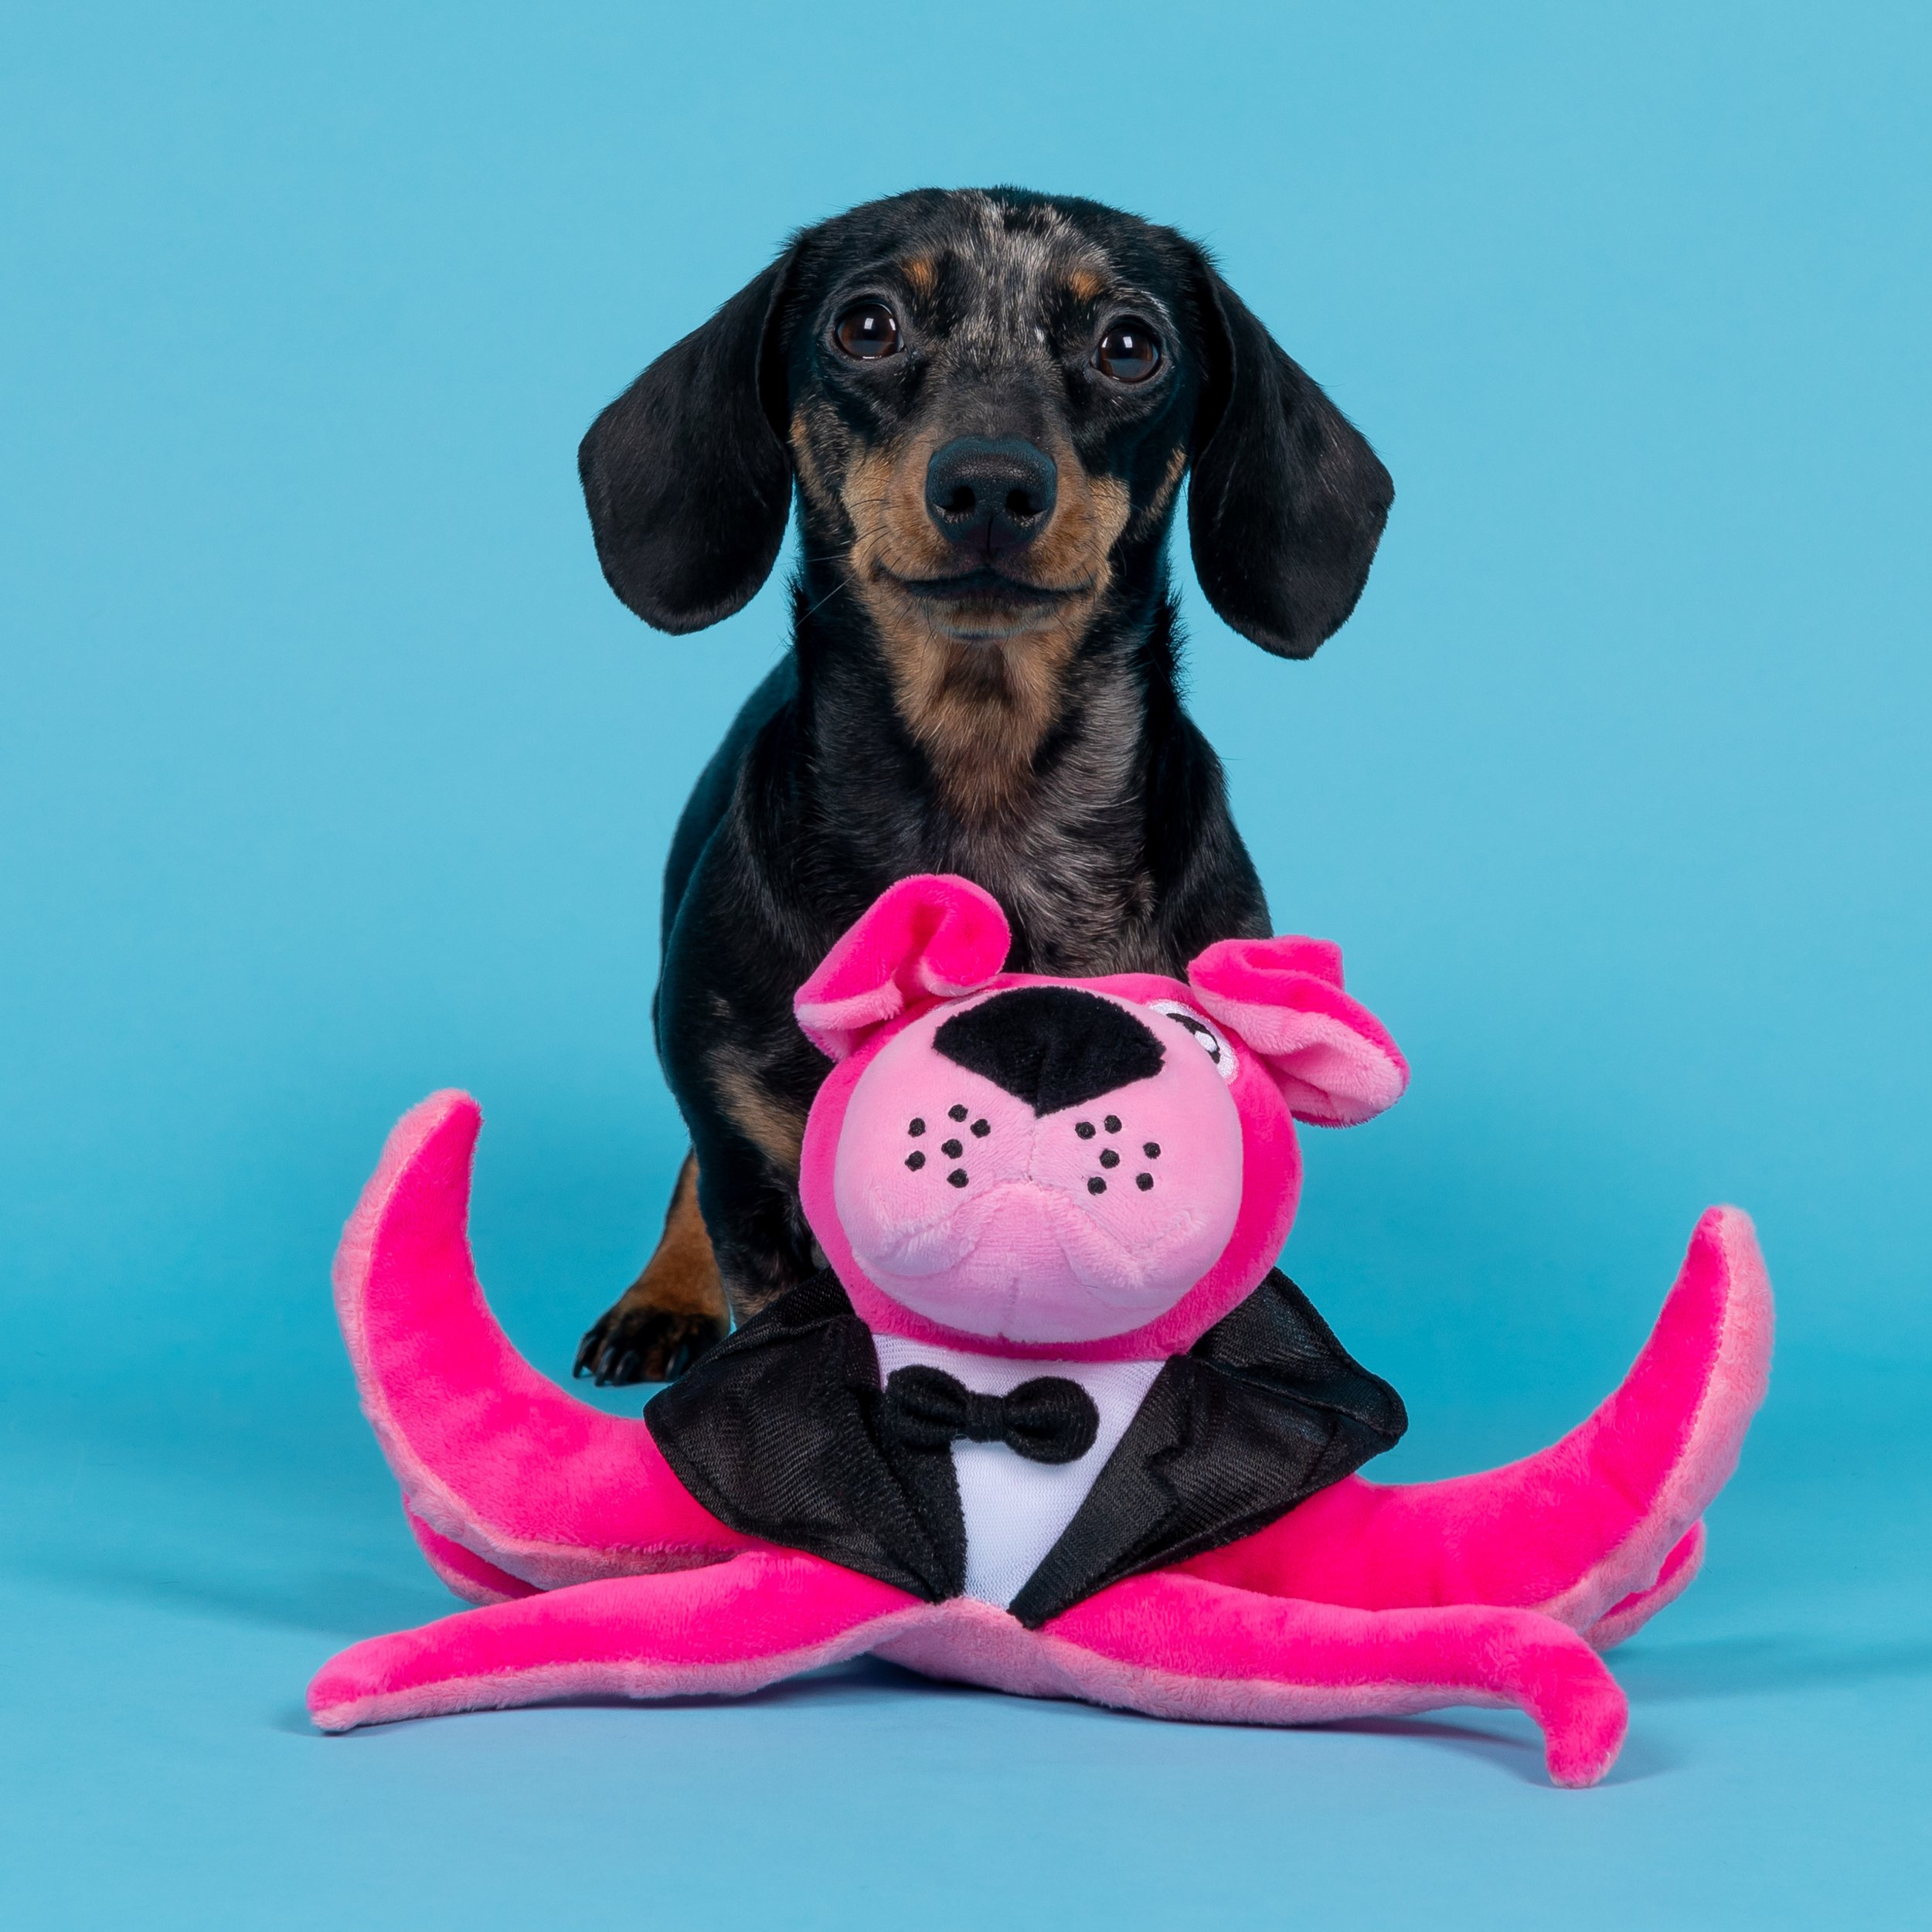 sausage dog with octopus toy, cute dog with dog toy